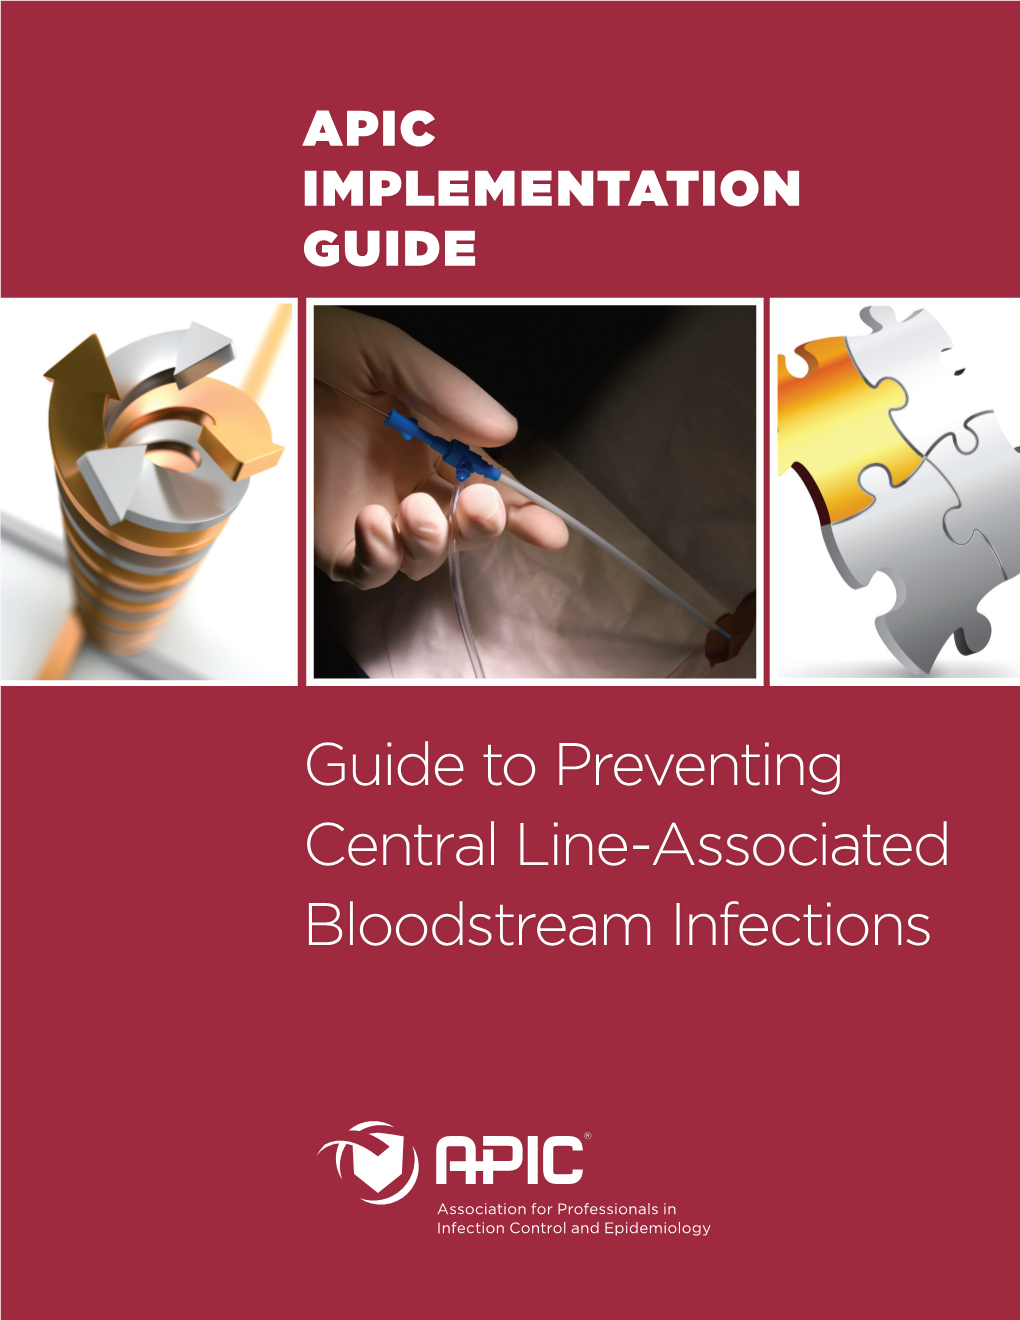 Guide to Preventing Central Line-Associated Bloodstream Infections